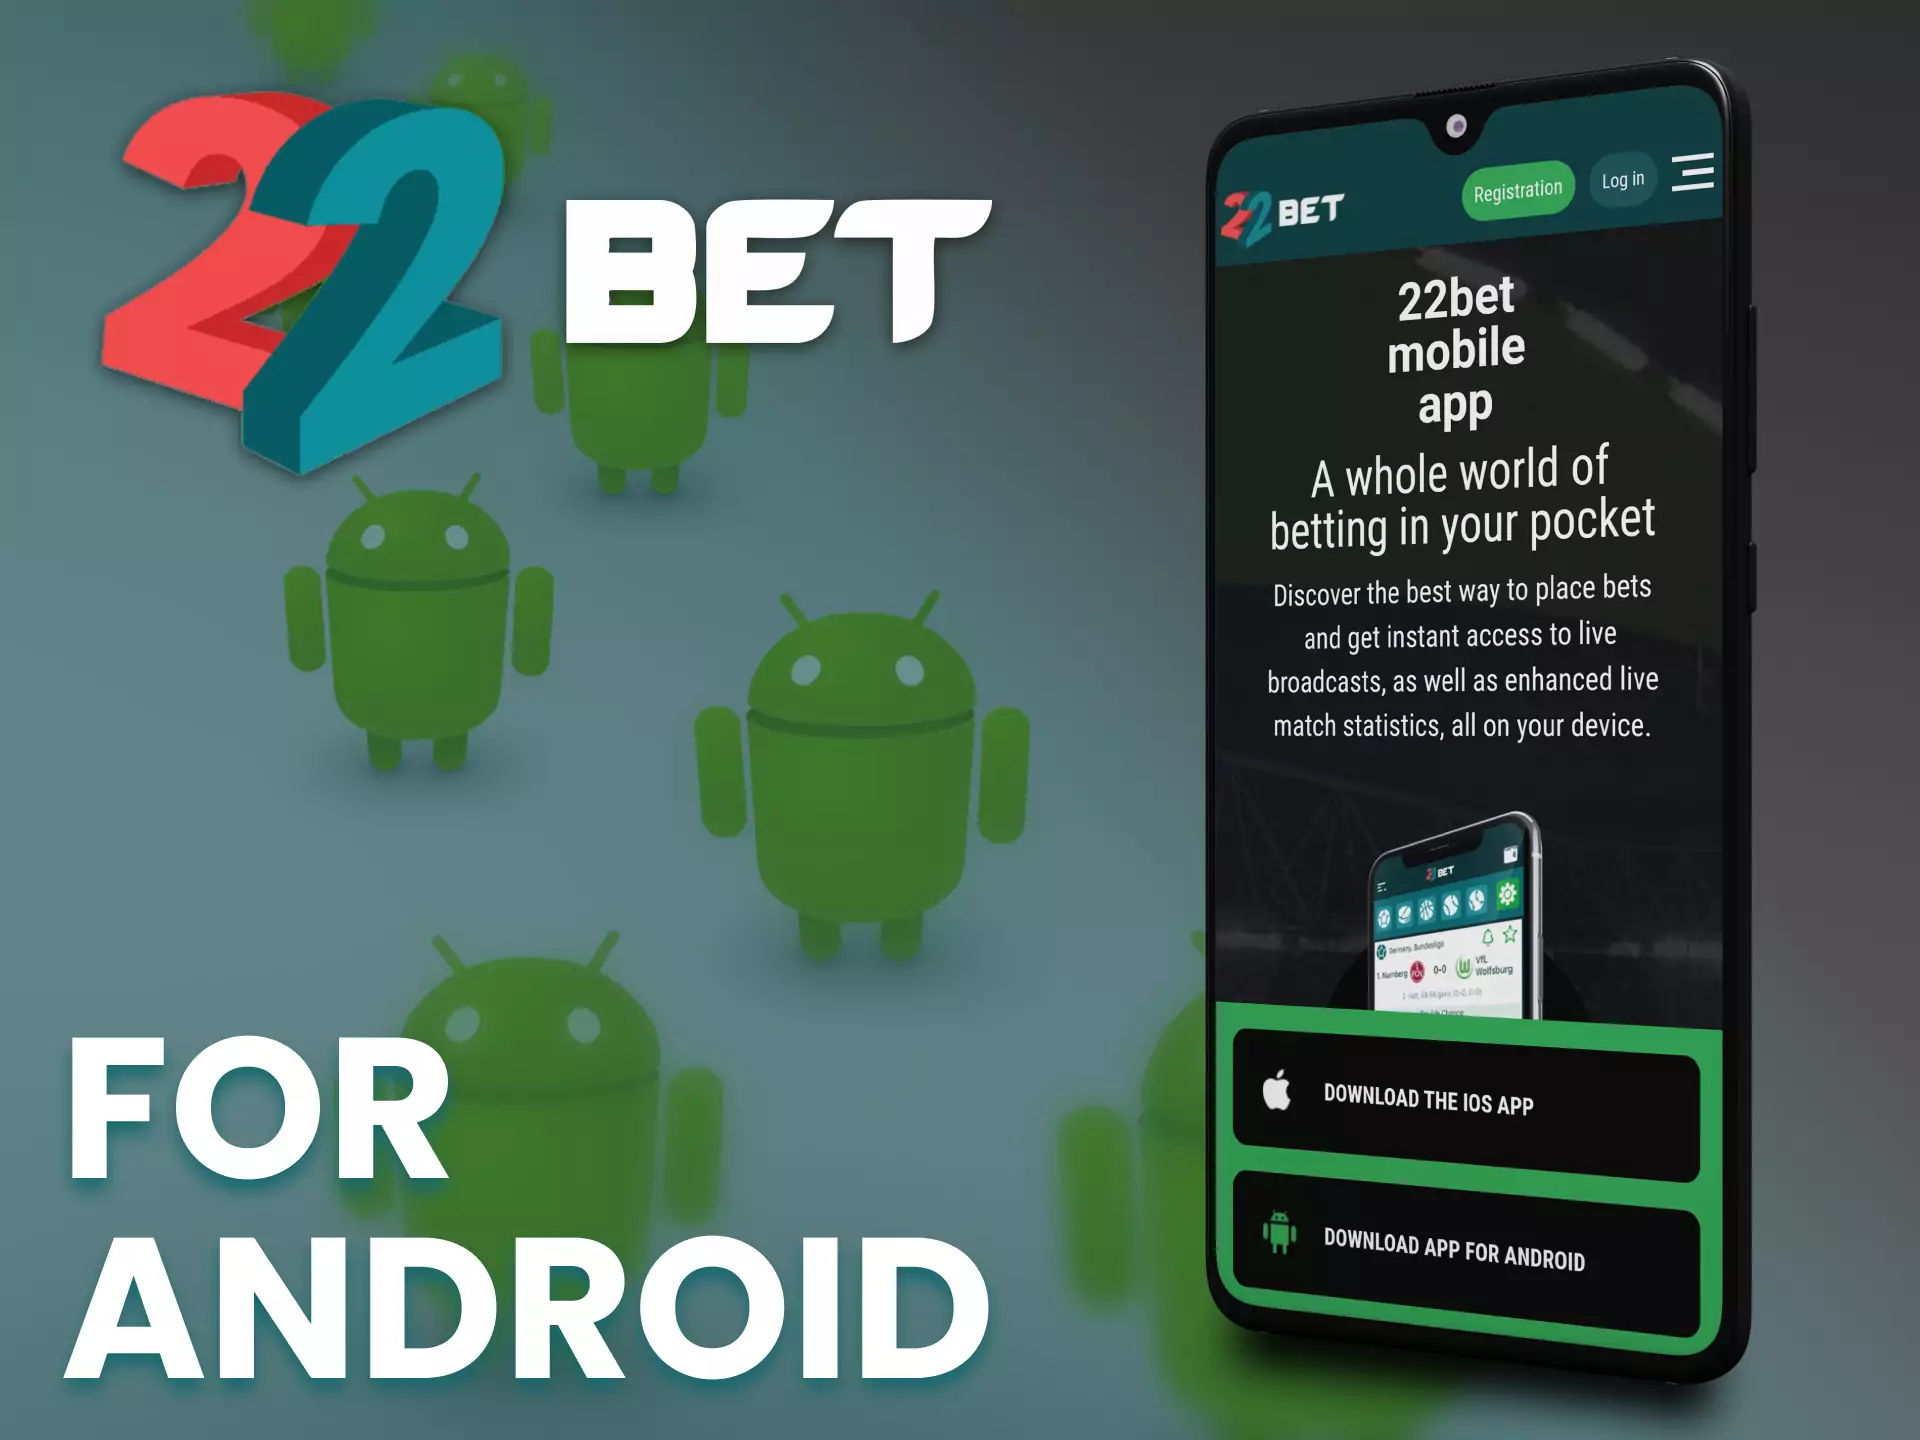 22bet app is easy to install on your Android phone.